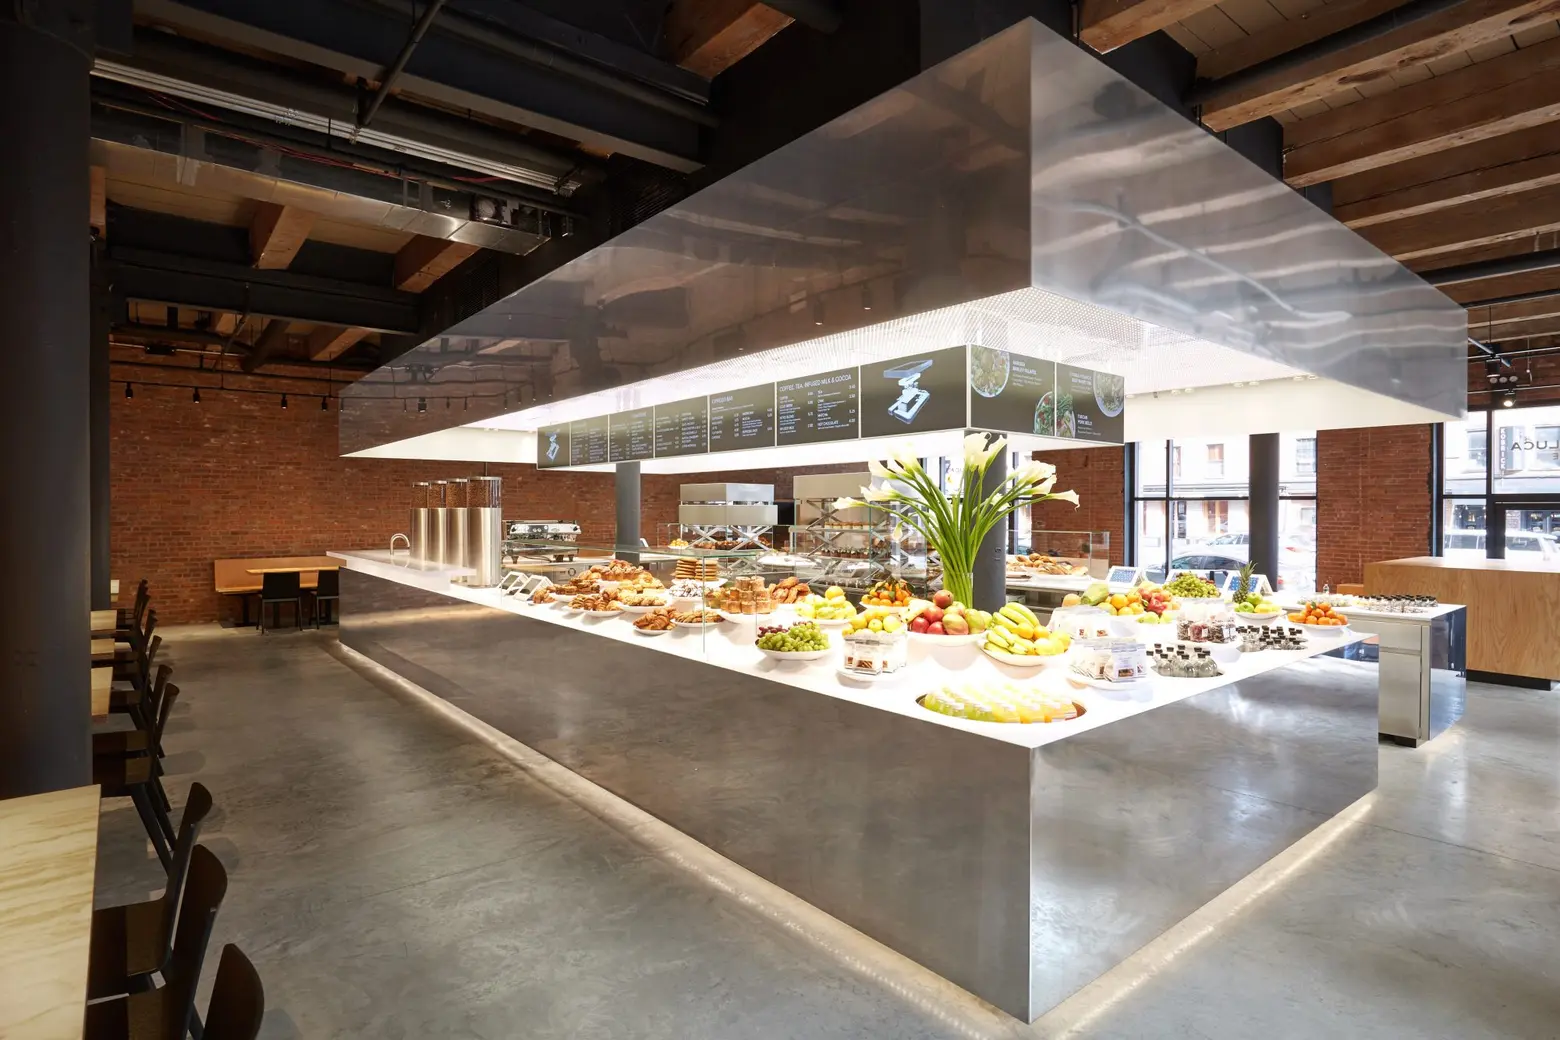 Dean & Deluca debuts a new fast food concept in the Meatpacking District